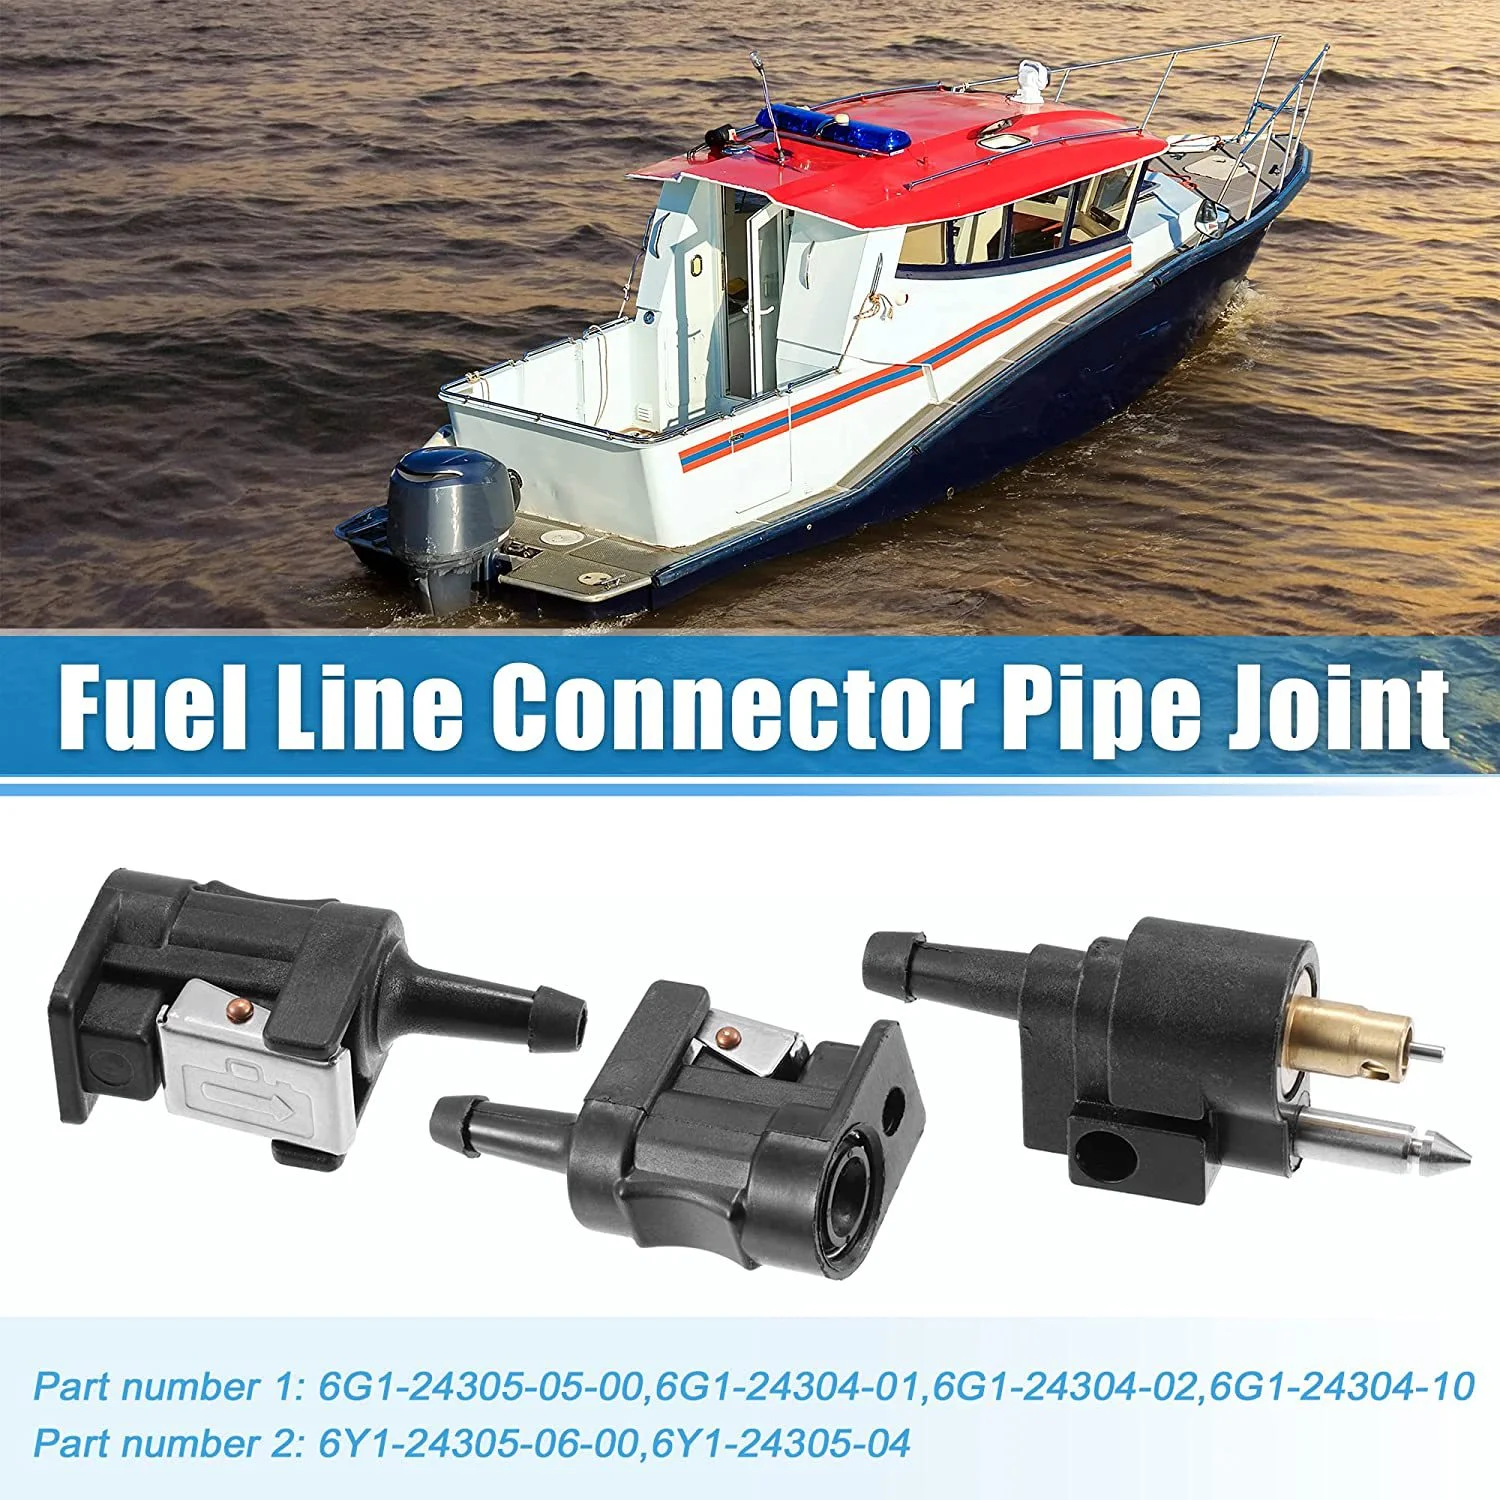 Marine Outboard Oil Tank Fuel Line Male/ Female Sockets Quick Coupling Yachts/Fishing Boats/Fast Boats/Cruise Ships Accessories